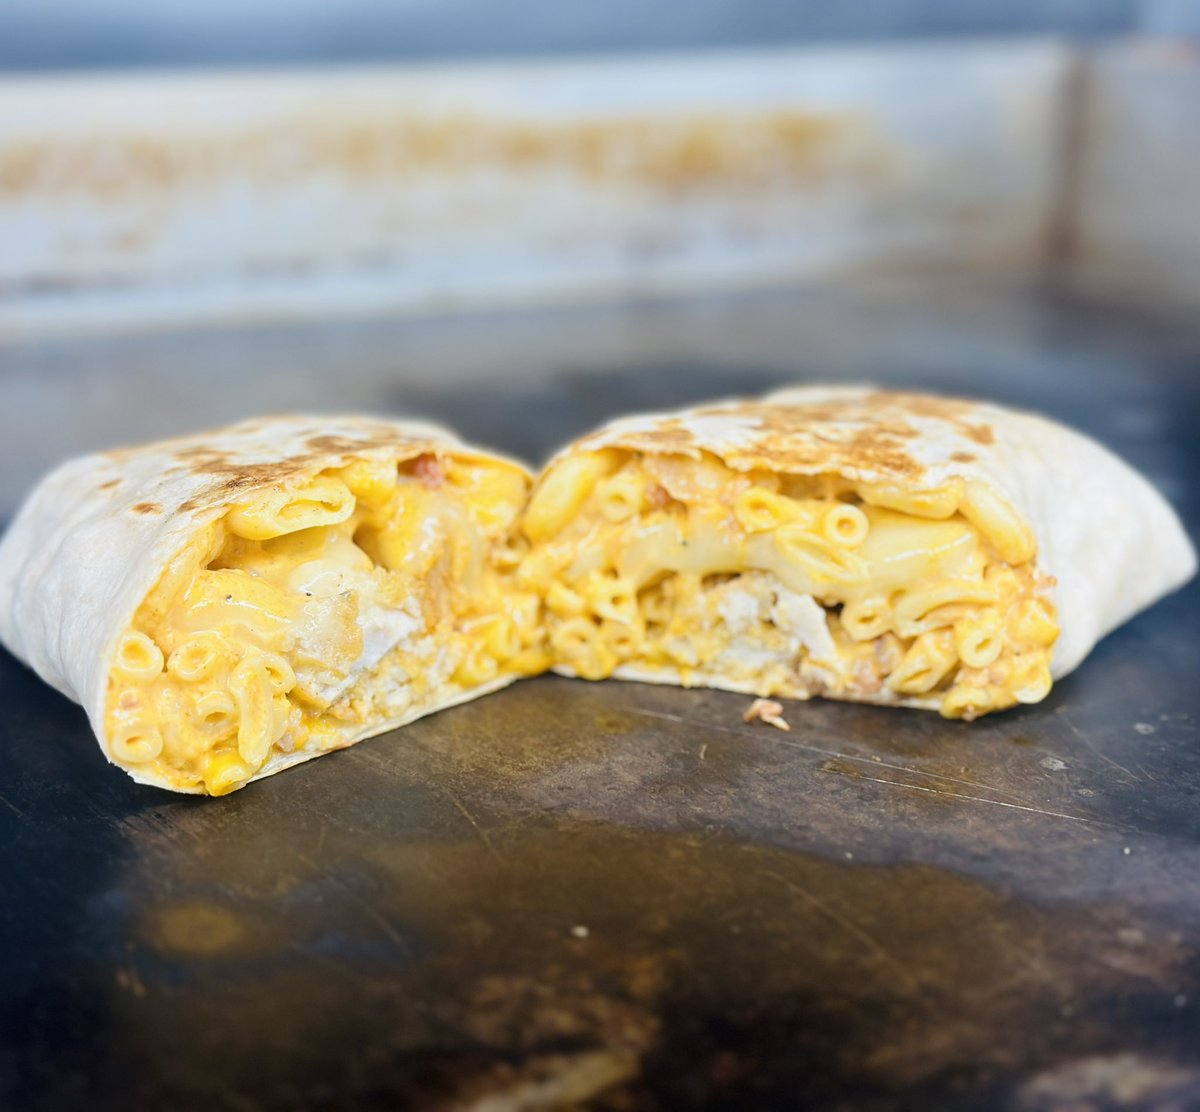 On this installment of BIG ASS BURRITO 🌯 
Extra Large Tortilla stuffed with applewood smoked bacon, fried buffalo & a truckmade four cheese buffalo mac!
@NightShiftBeer today, 12-6p 

🤘🍔🤘
Hail & Grill! 
#foodtrucklife #eatlocal #foodporn #foodie #bostonfoodtrucks #drinklocal